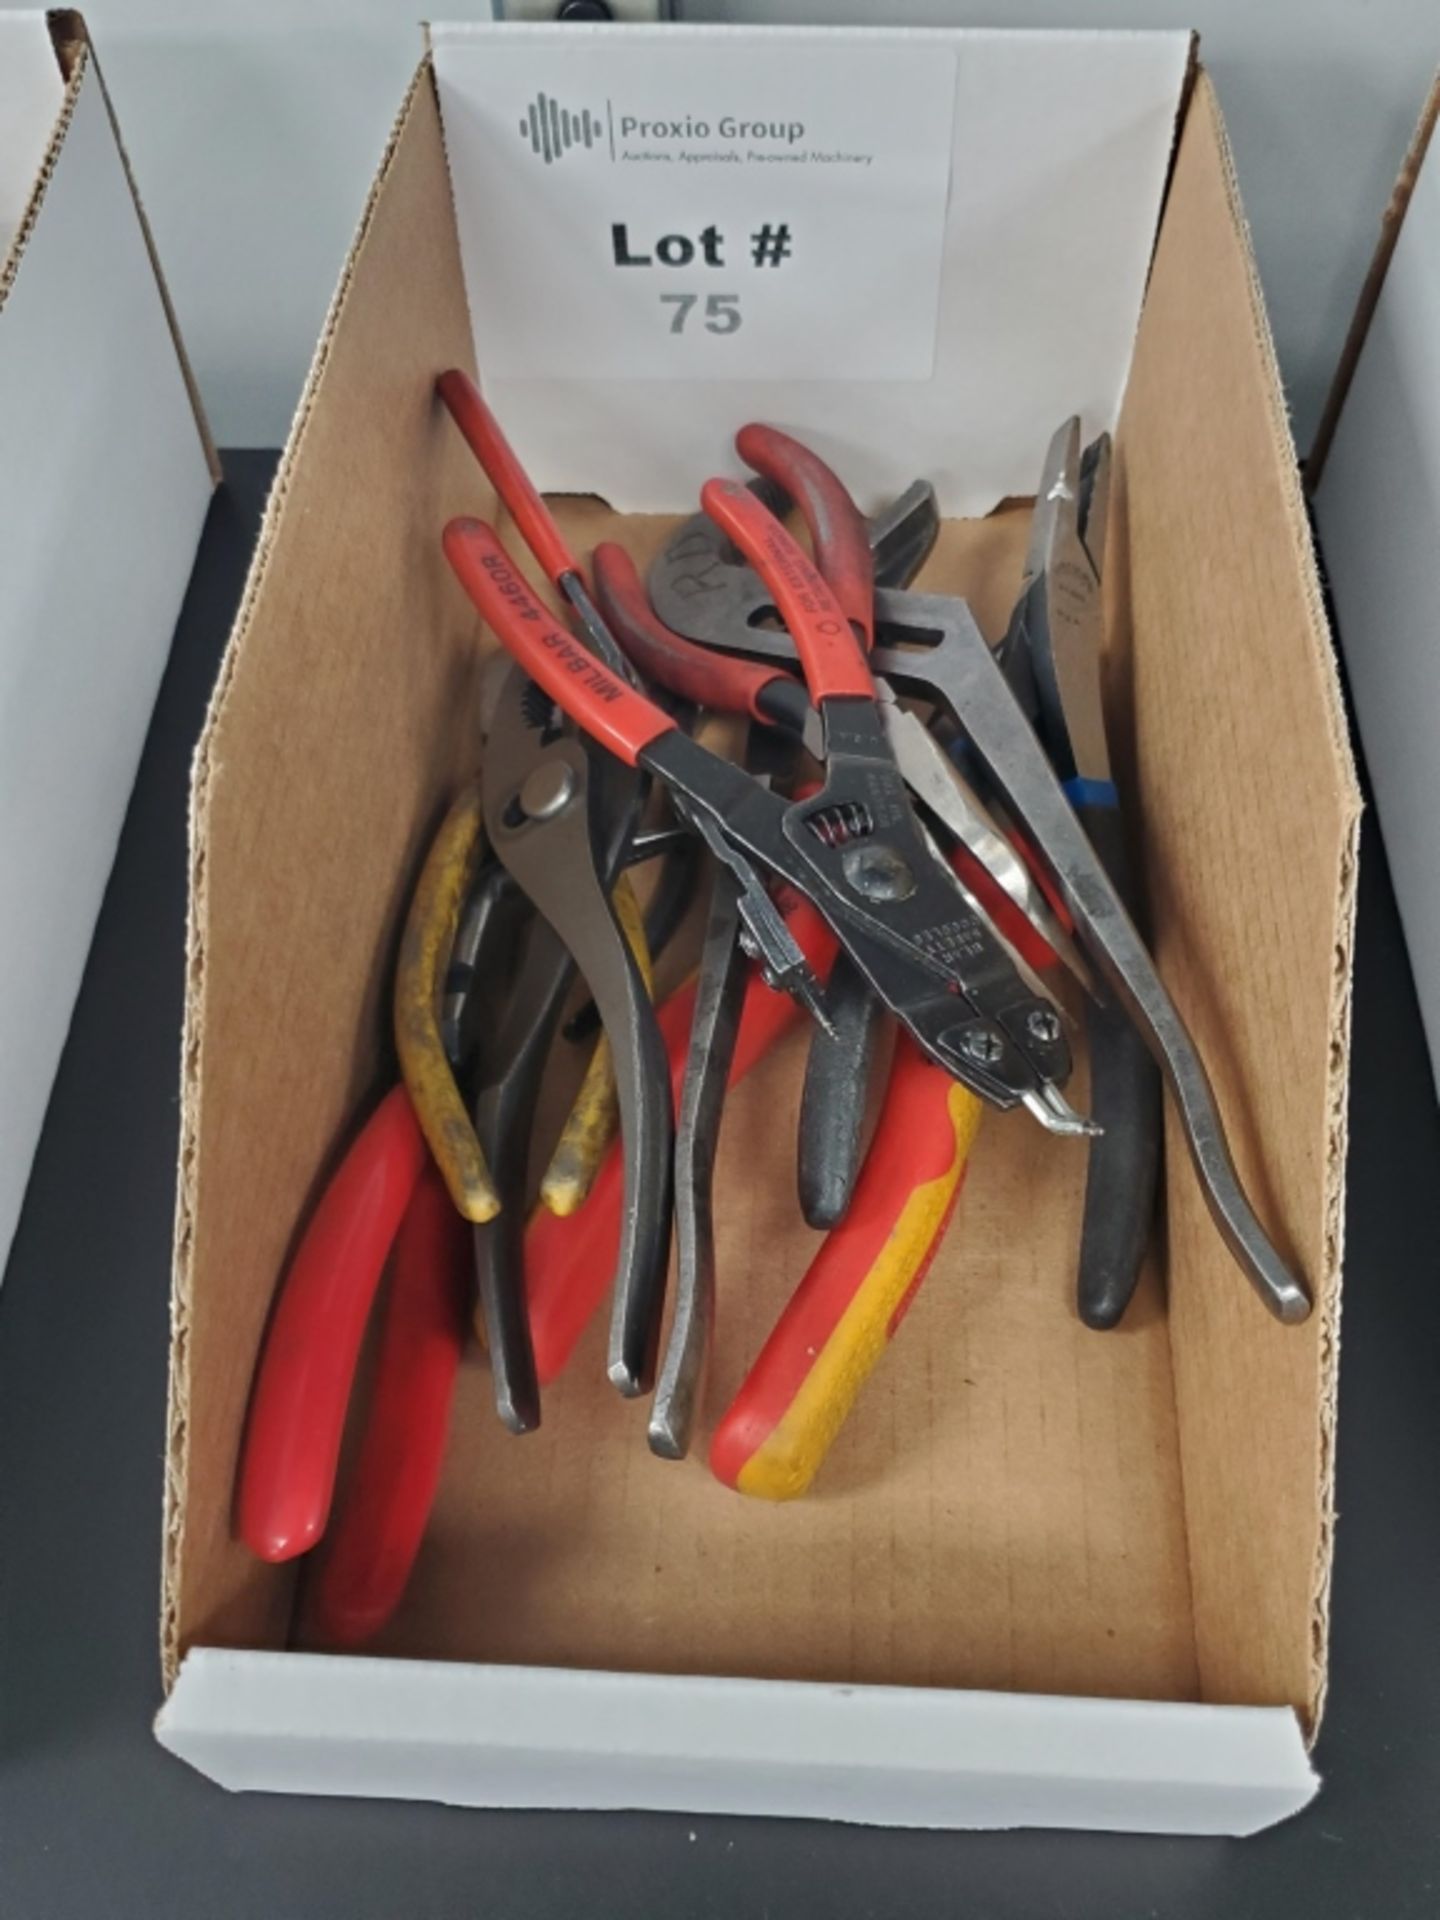 Lot Box Of Misc Dykes, Pliers, O-ring Pliers, Cutters and More